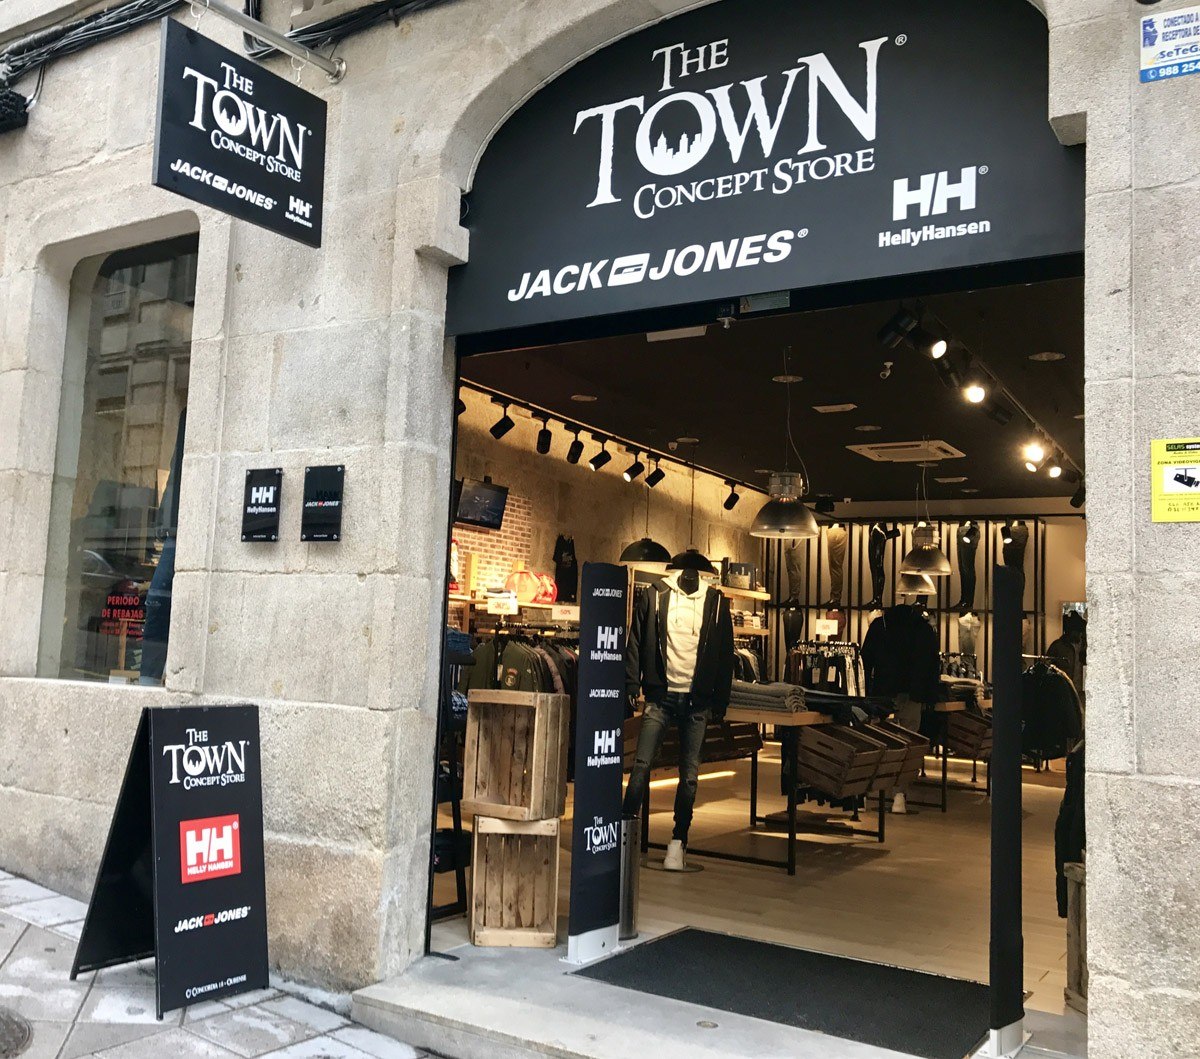 The ToWn Concept Store